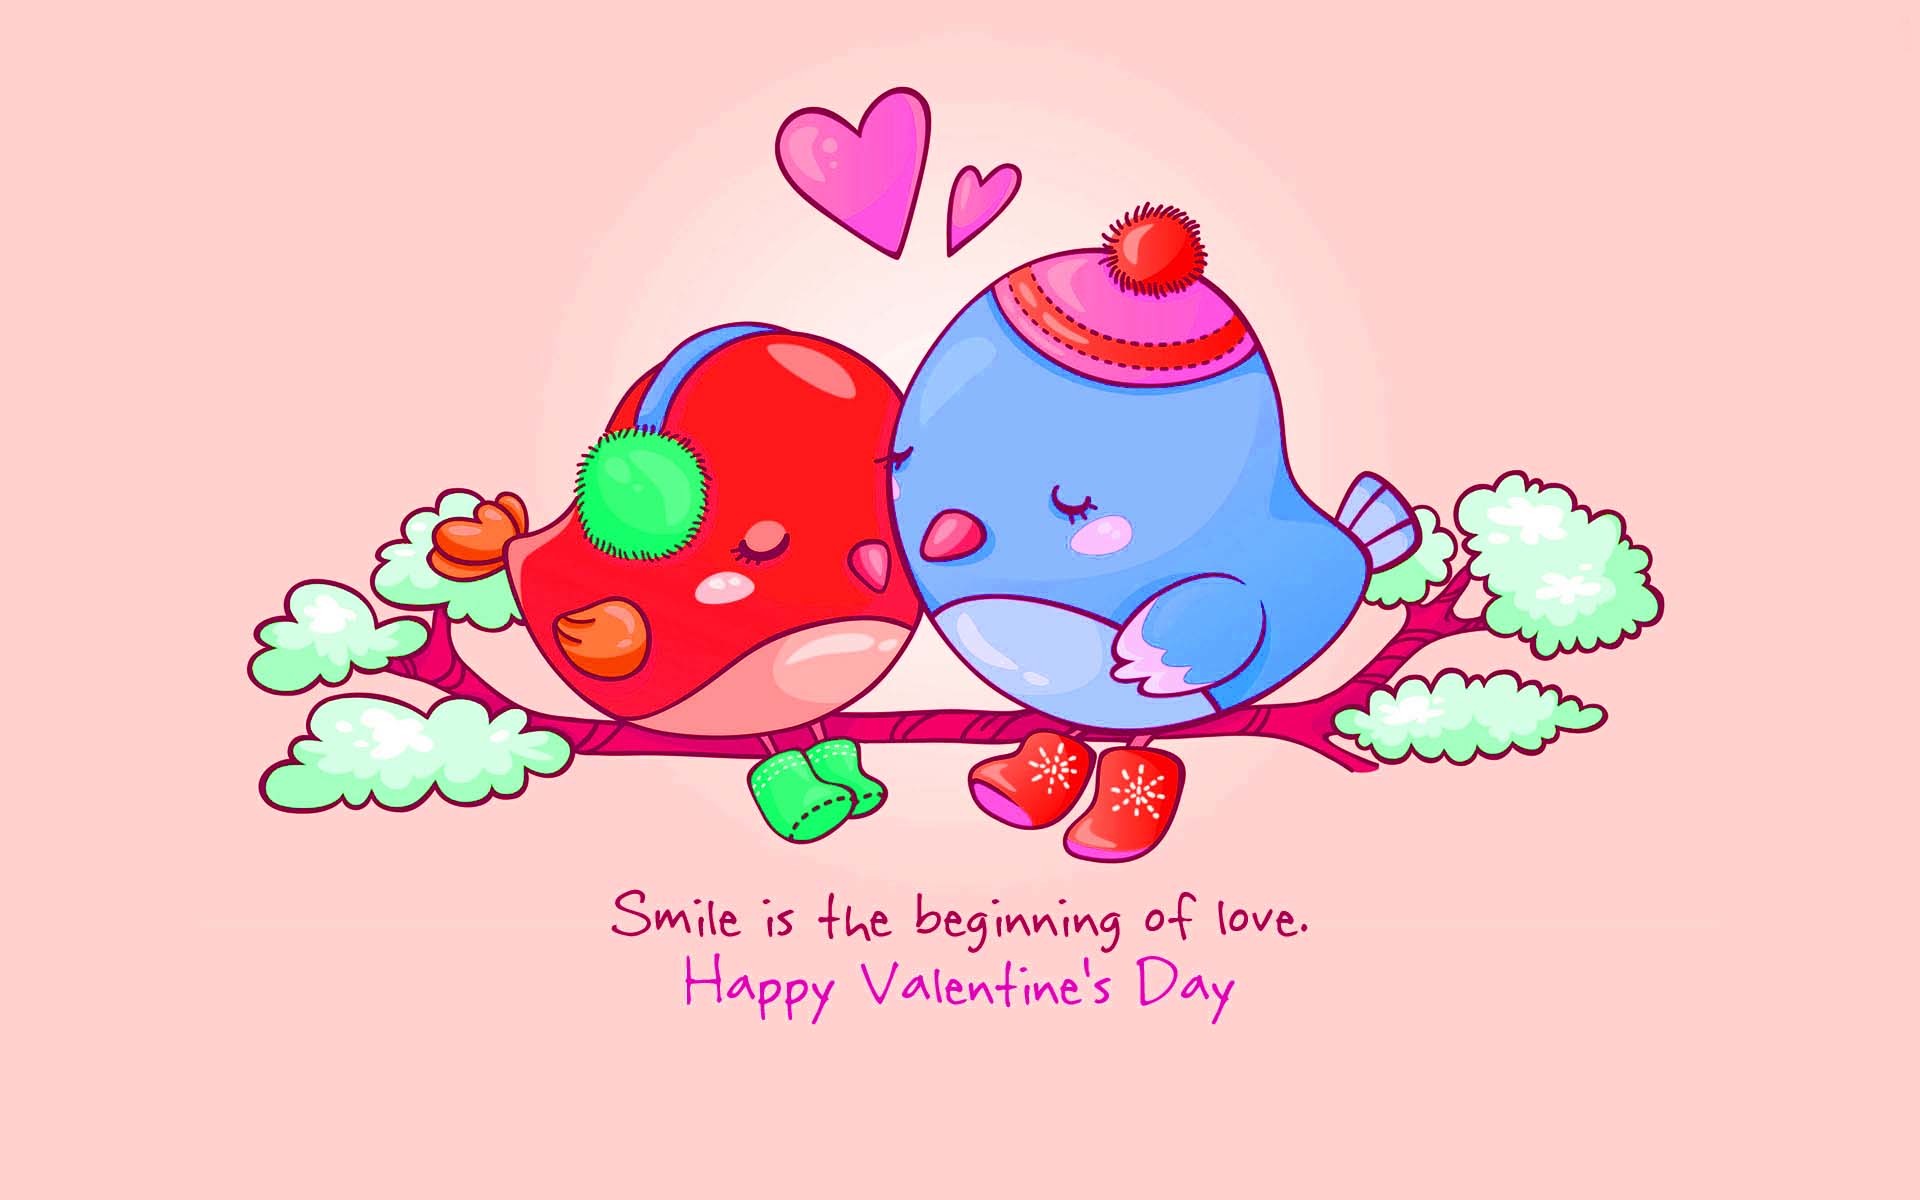 1920x1200 Happy Valentines Day Saying Images, Text Messages in 140 Words For  Girlfriend / Boyfriend ~ Happy Valentines Day 2017 Images Pictures,Saying  Quotes, ...